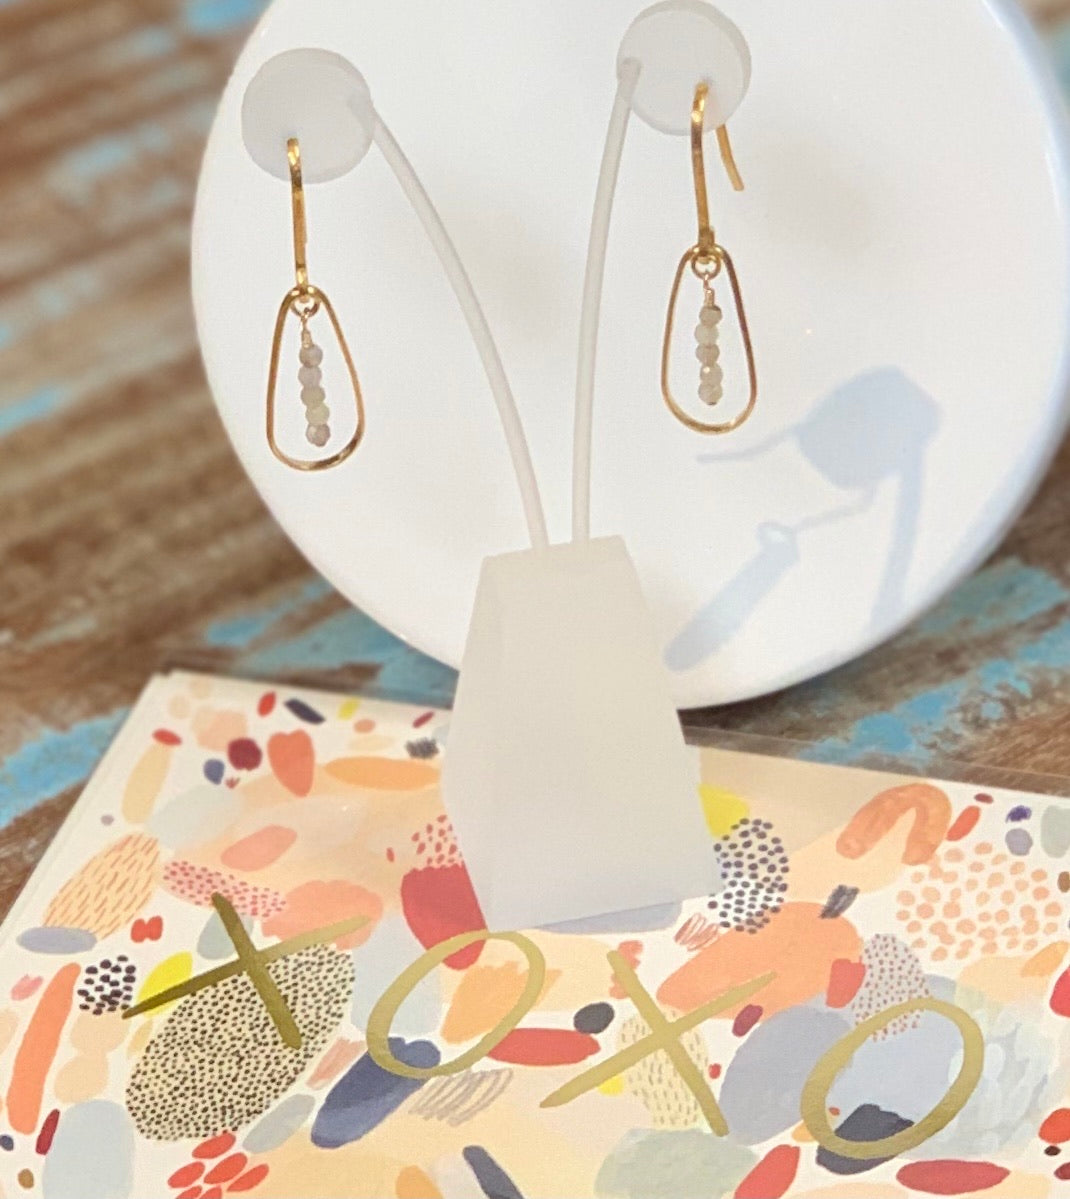 Gold and Labradorite Teardrop Earrings with an XOXO red cap card